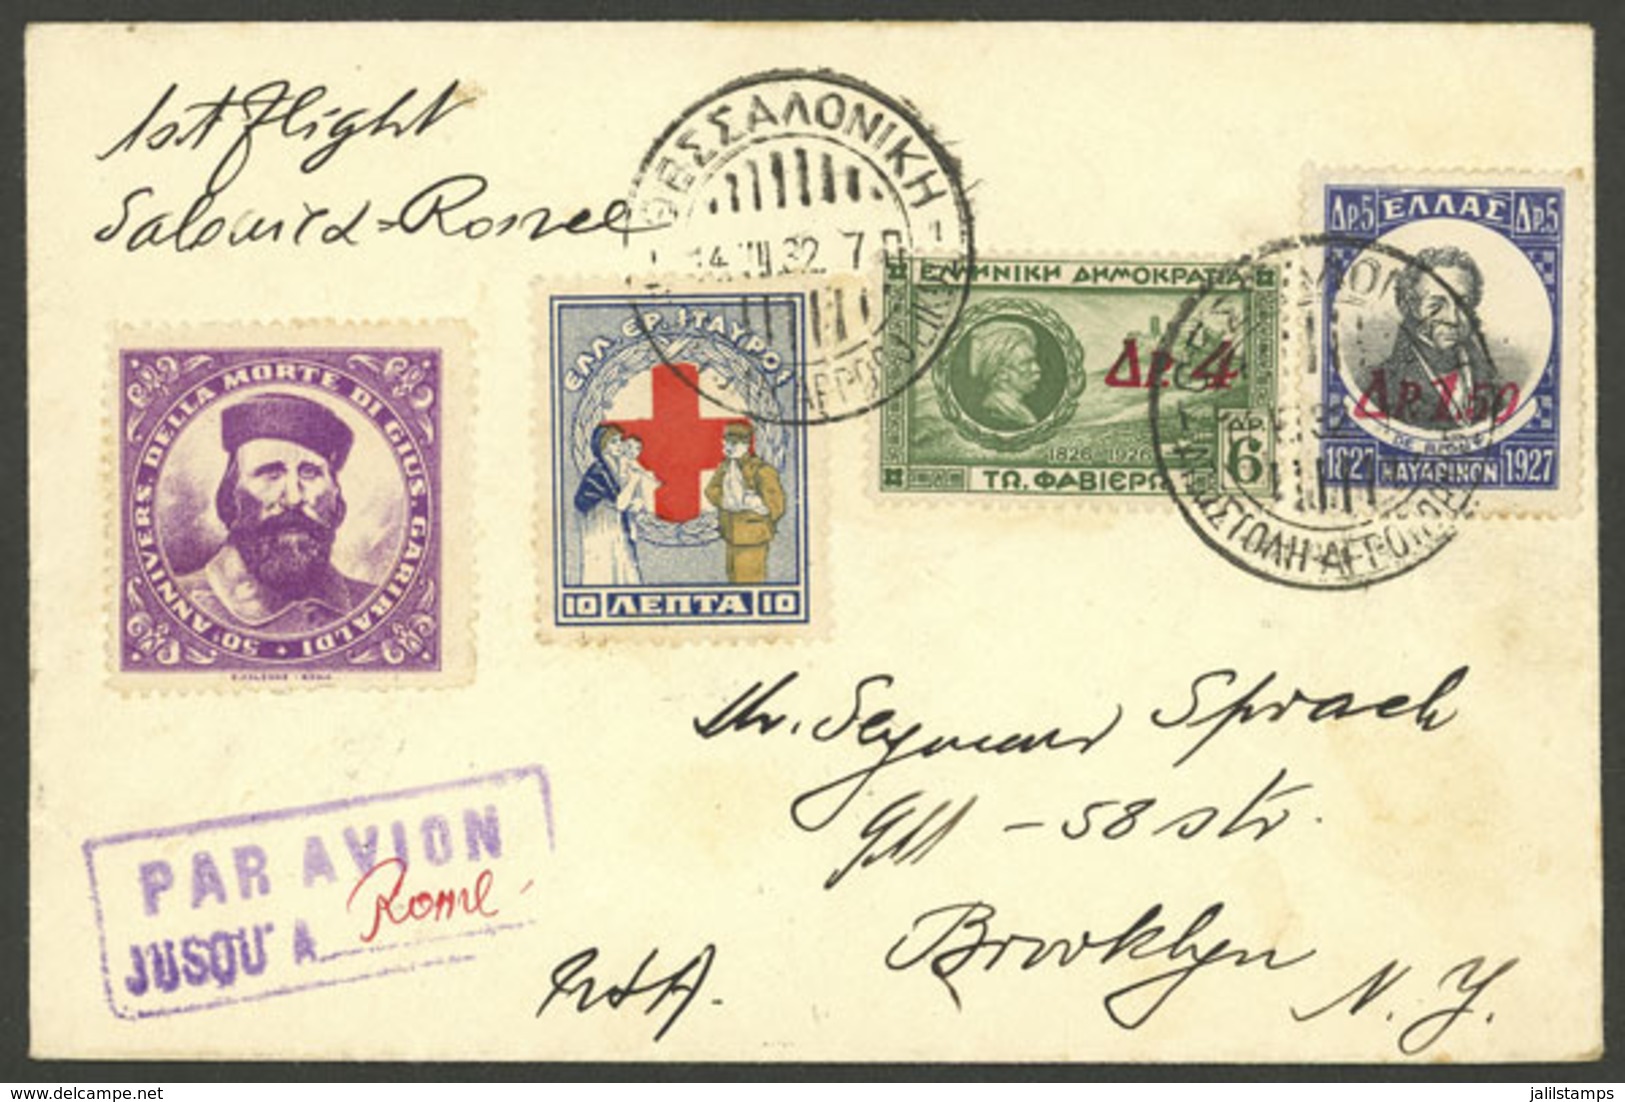 GREECE: 14/JUL/1932 First Flight Salonica - Roma By S.A.M., Cover Of Fine Quality, Scarce, Only 42 Letters Were Carried  - Lettres & Documents